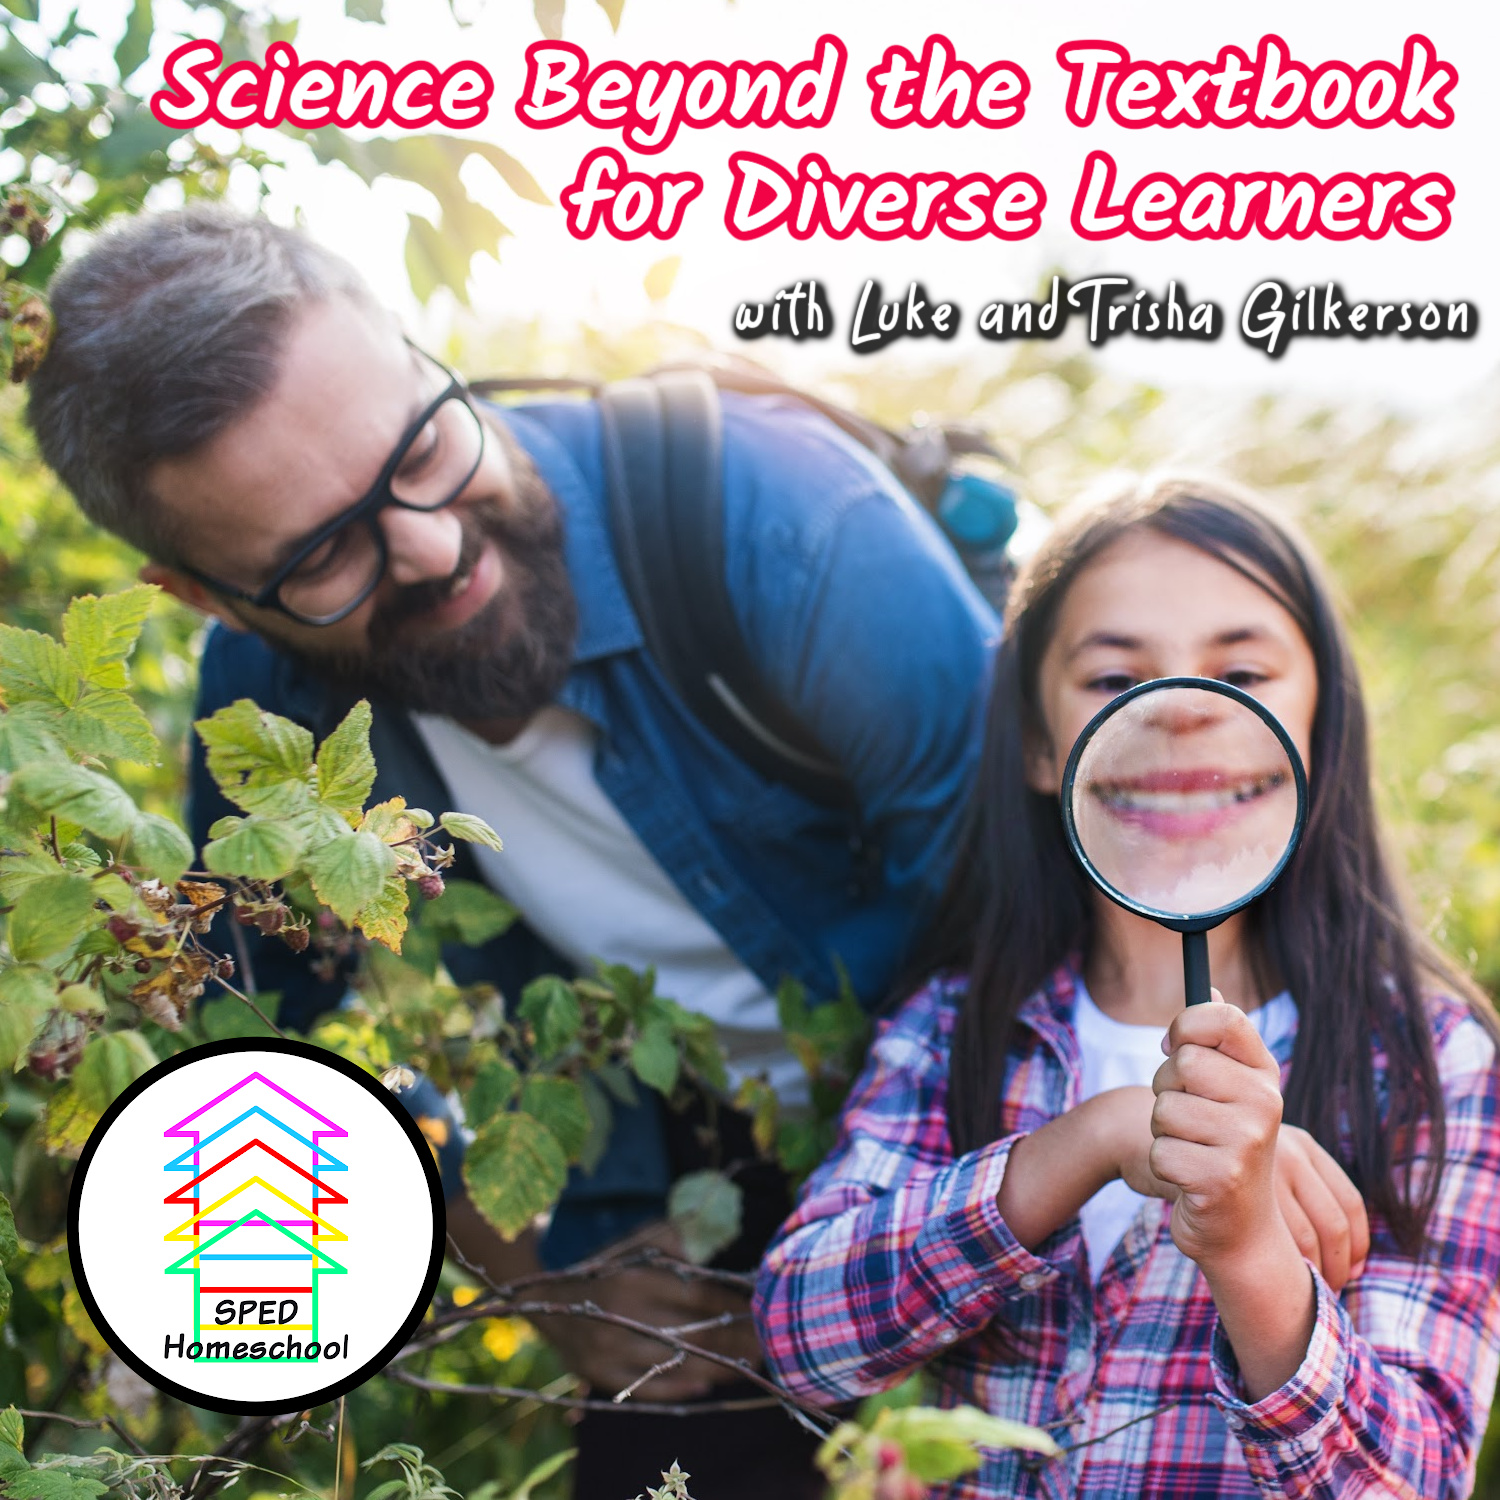 Science Beyond the Textbook for Diverse Learners